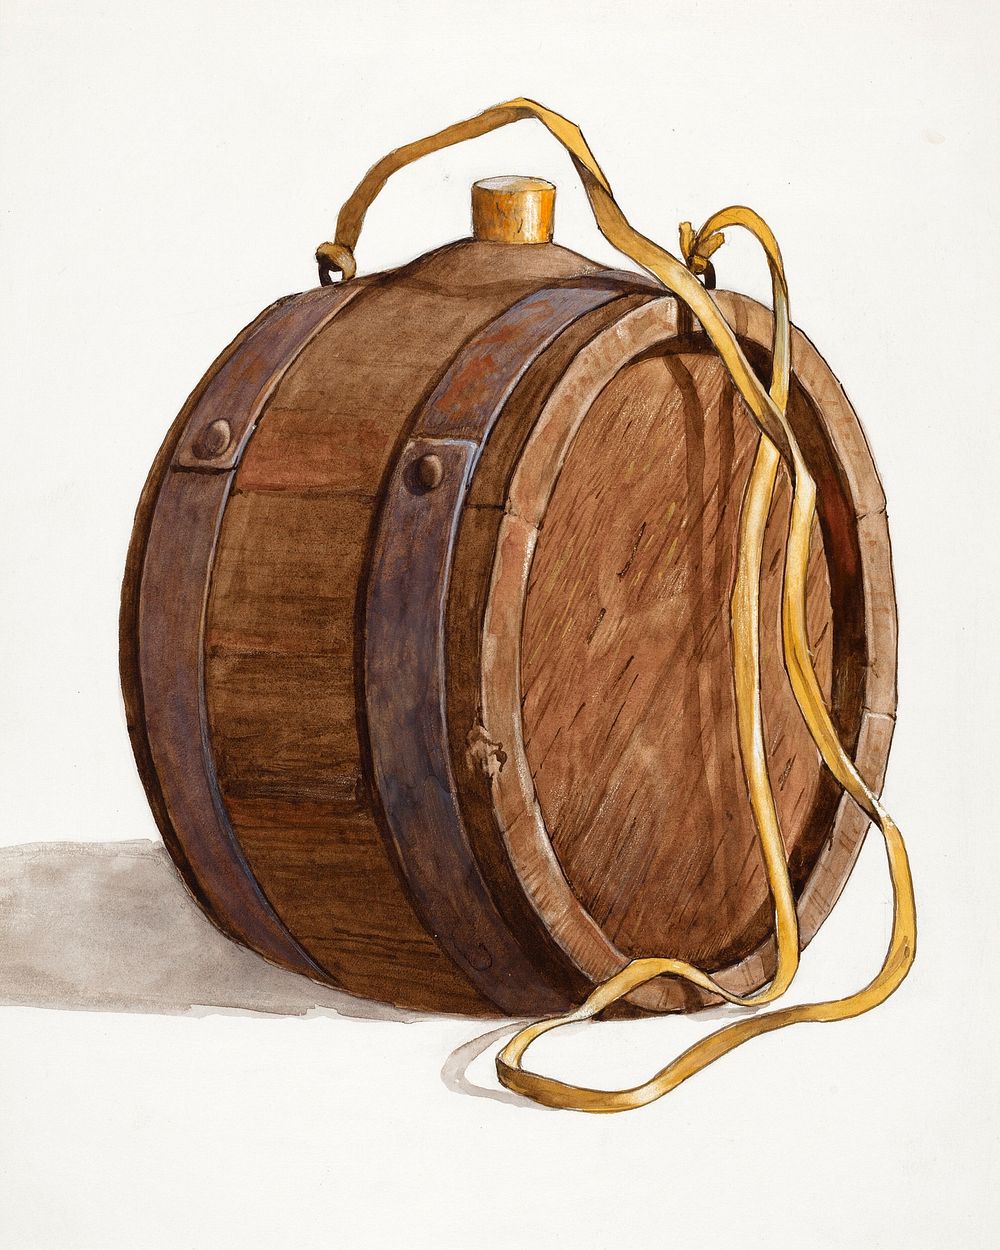 Water Barrel or Runlet (ca.1937) by Dana Bartlett. Original from The National Gallery of Art. Digitally enhanced by rawpixel.